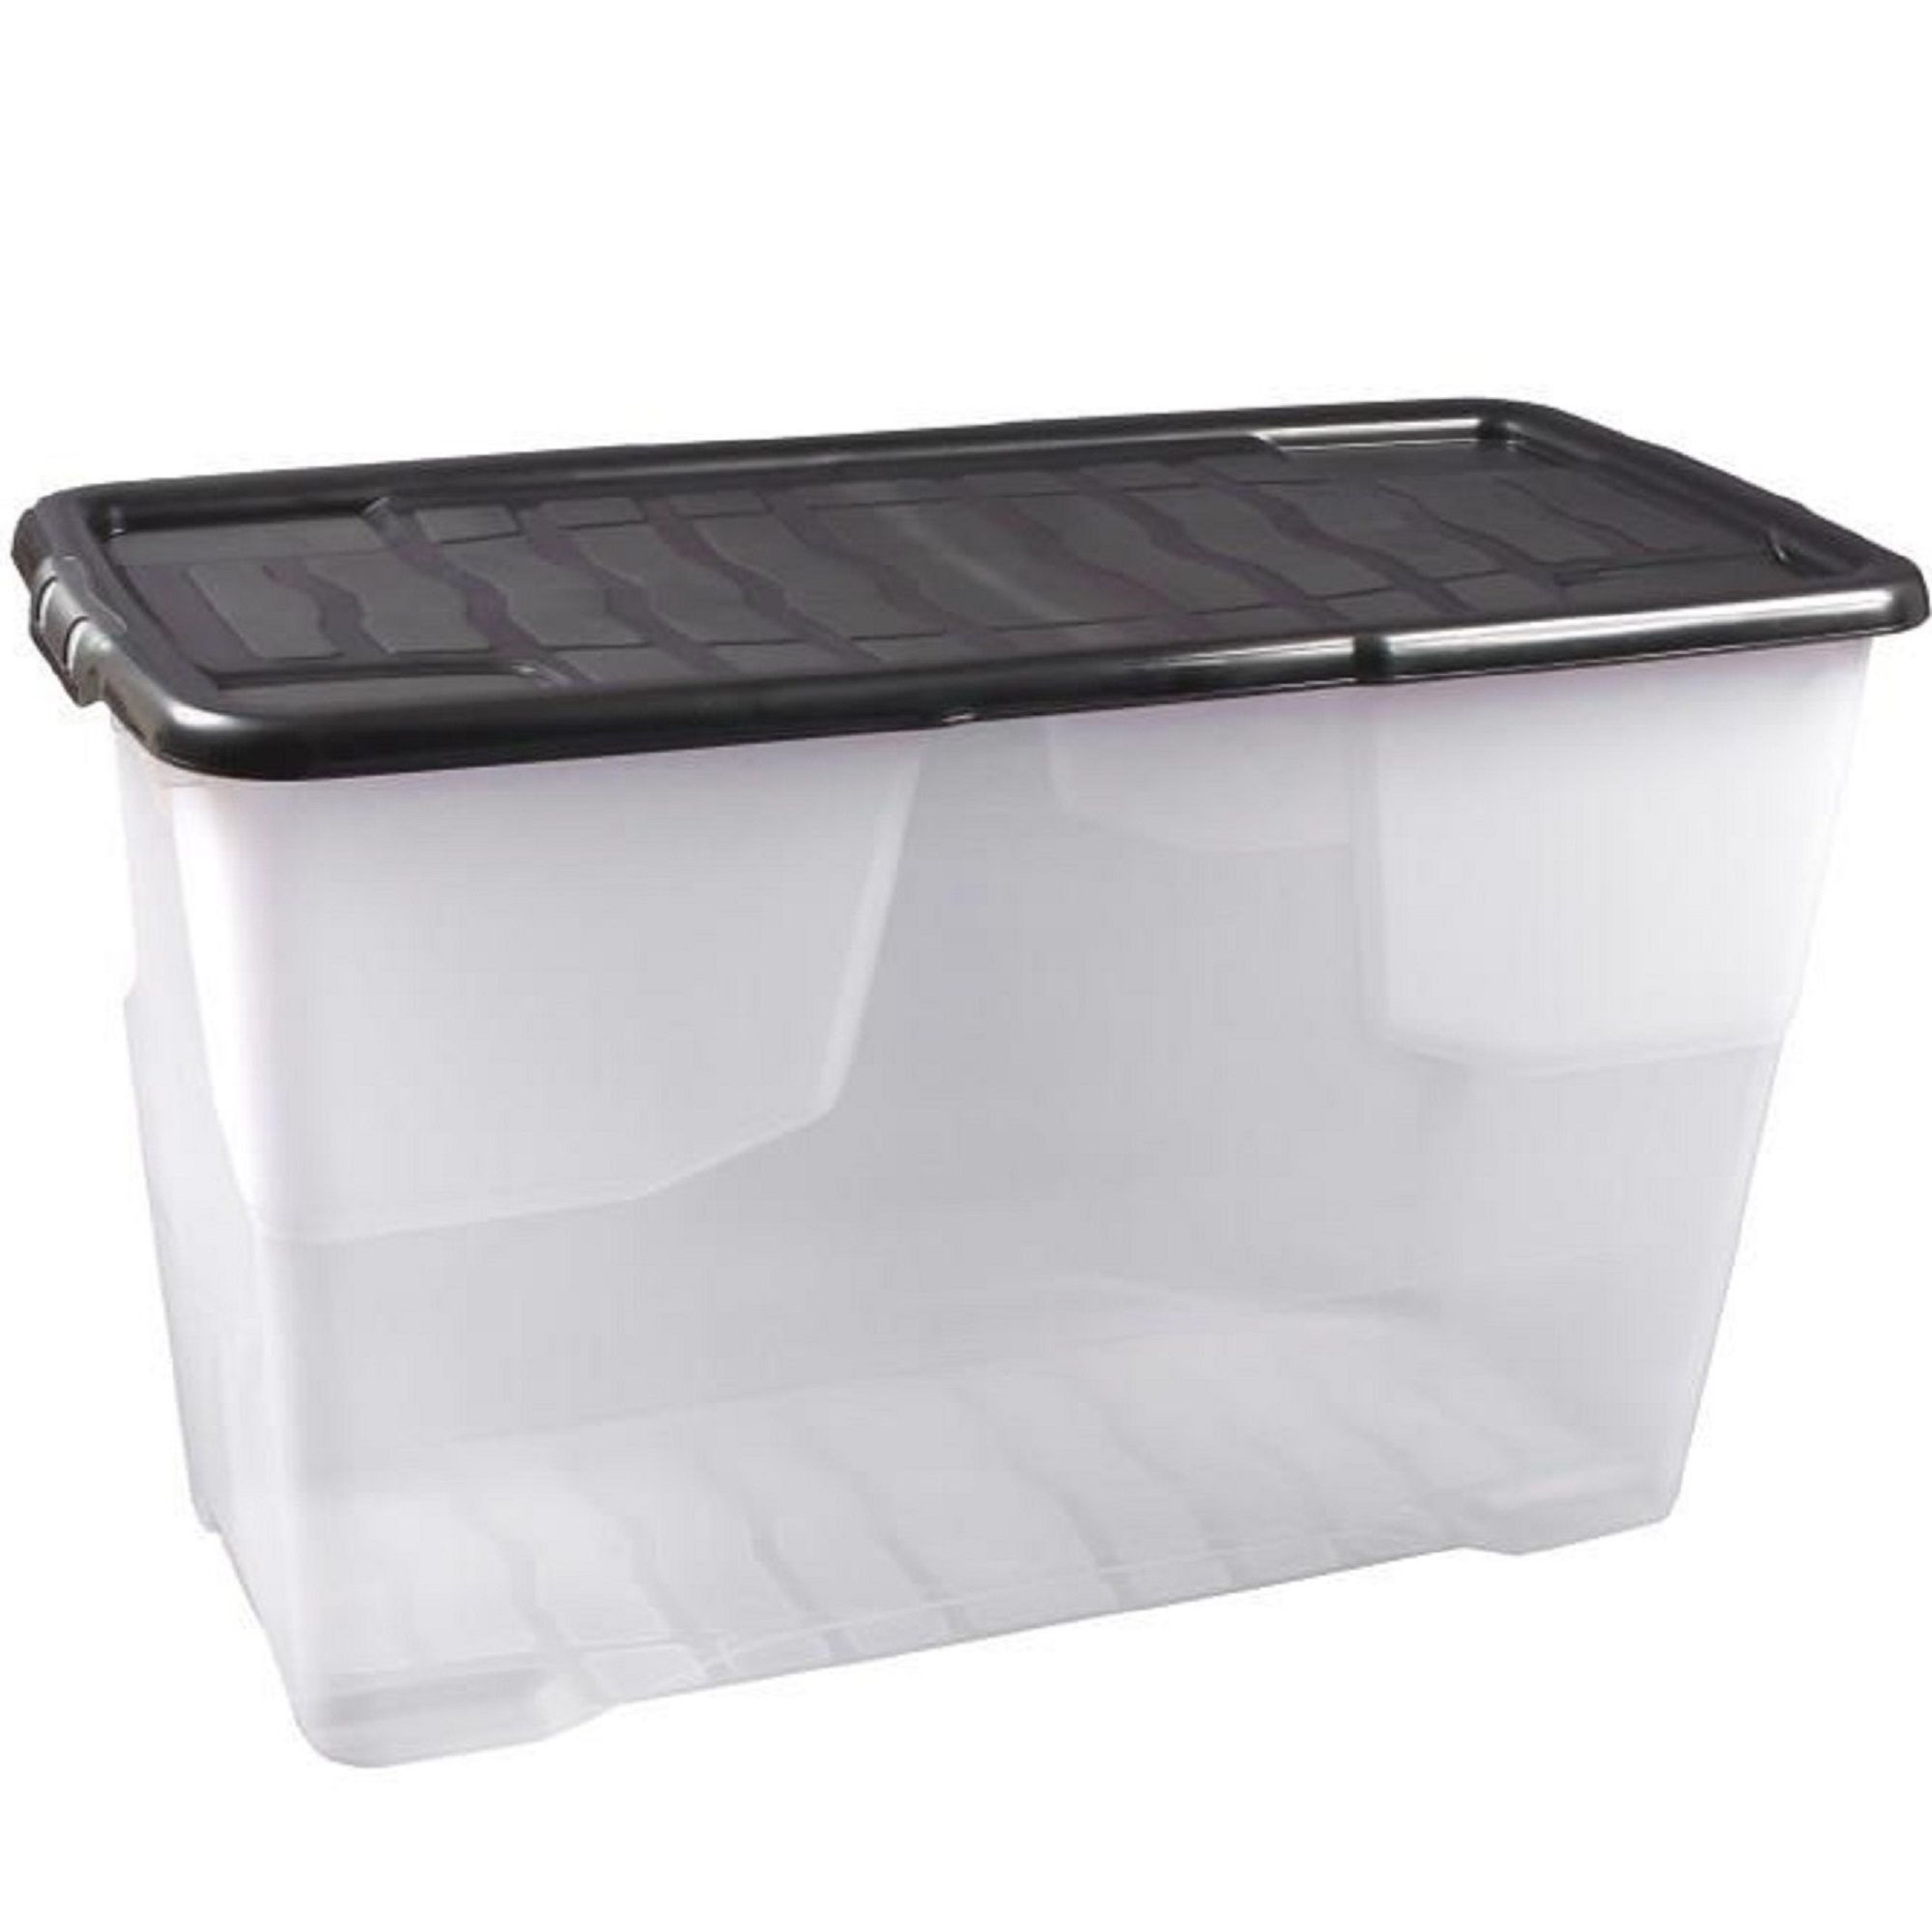 Allstore Heavy duty 54L Large Plastic Stackable Storage box with Lid